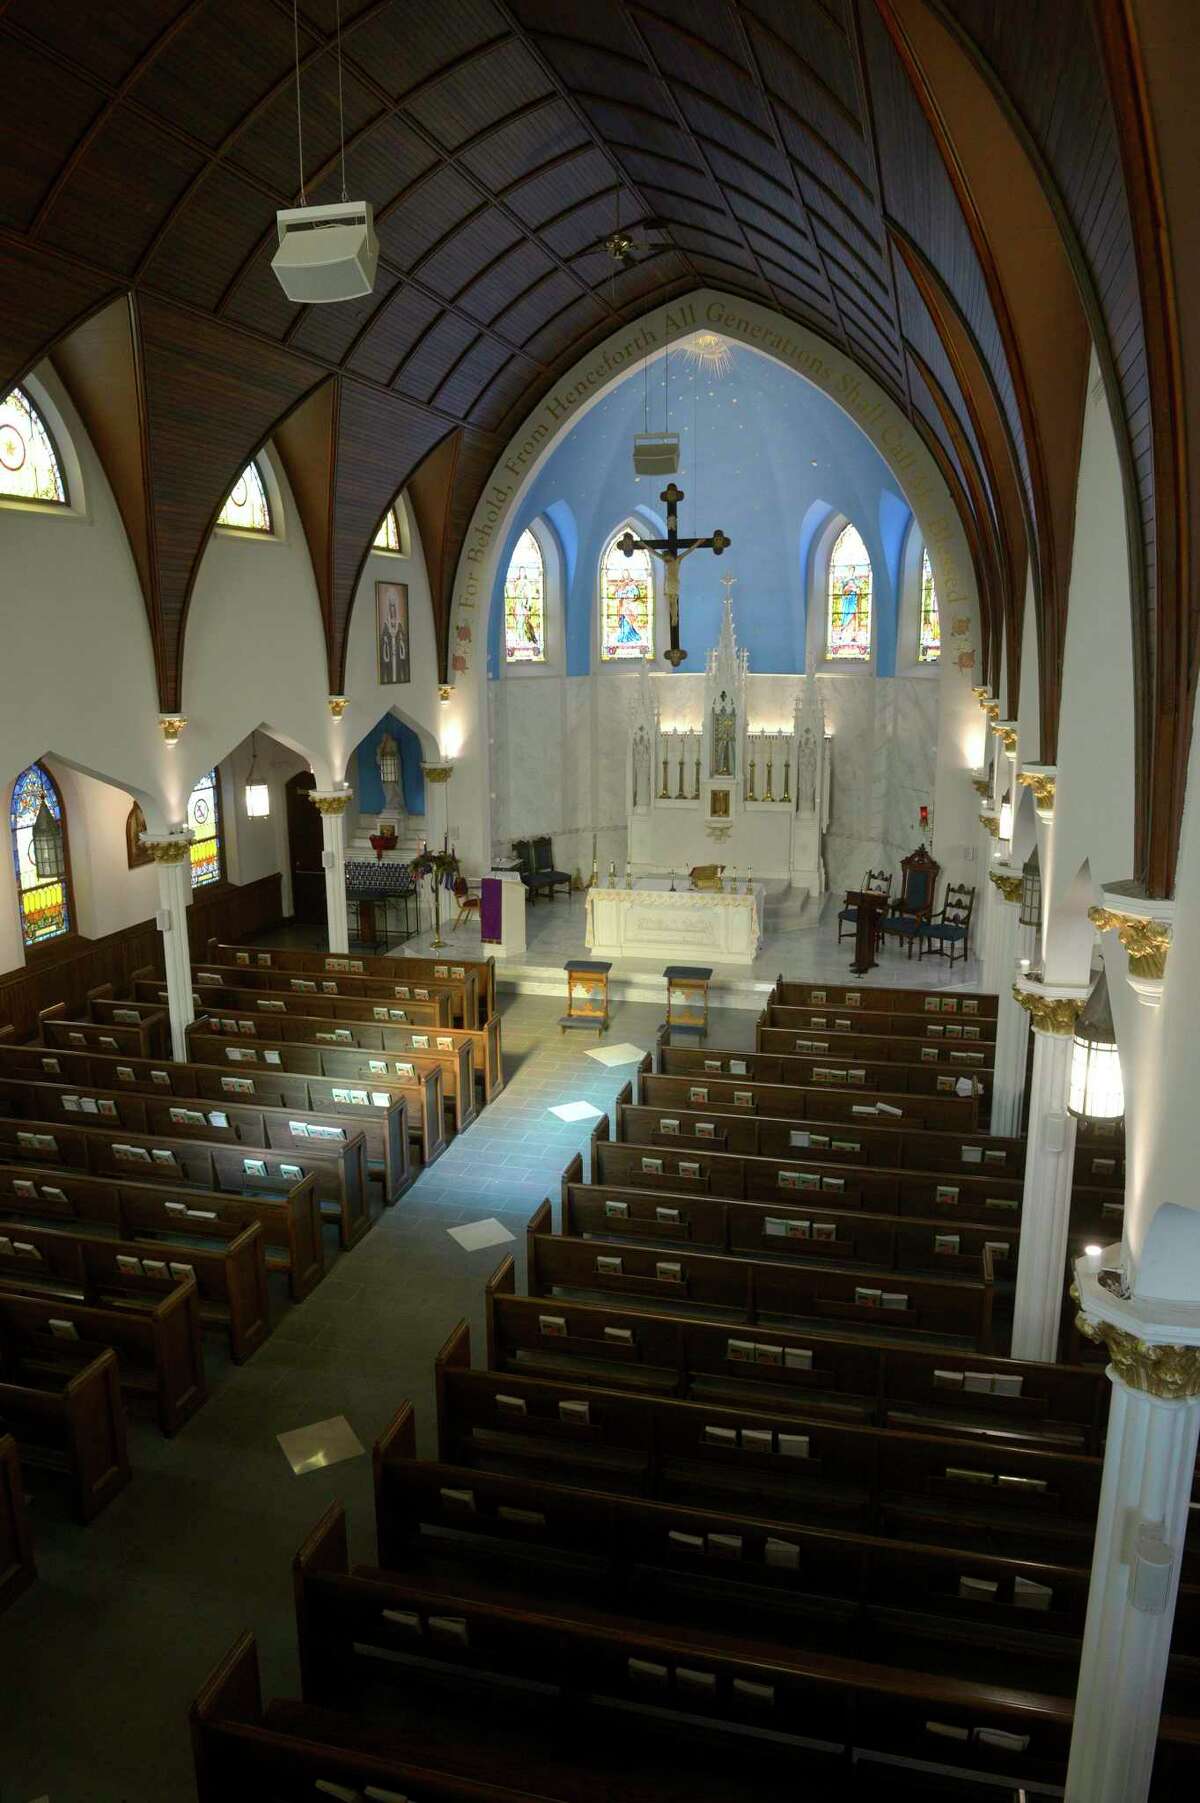 The newly-renovated St. Mary’s Parish church building recently reopened. Tuesday, Dec. 7, 2021, Ridgefield, Conn.